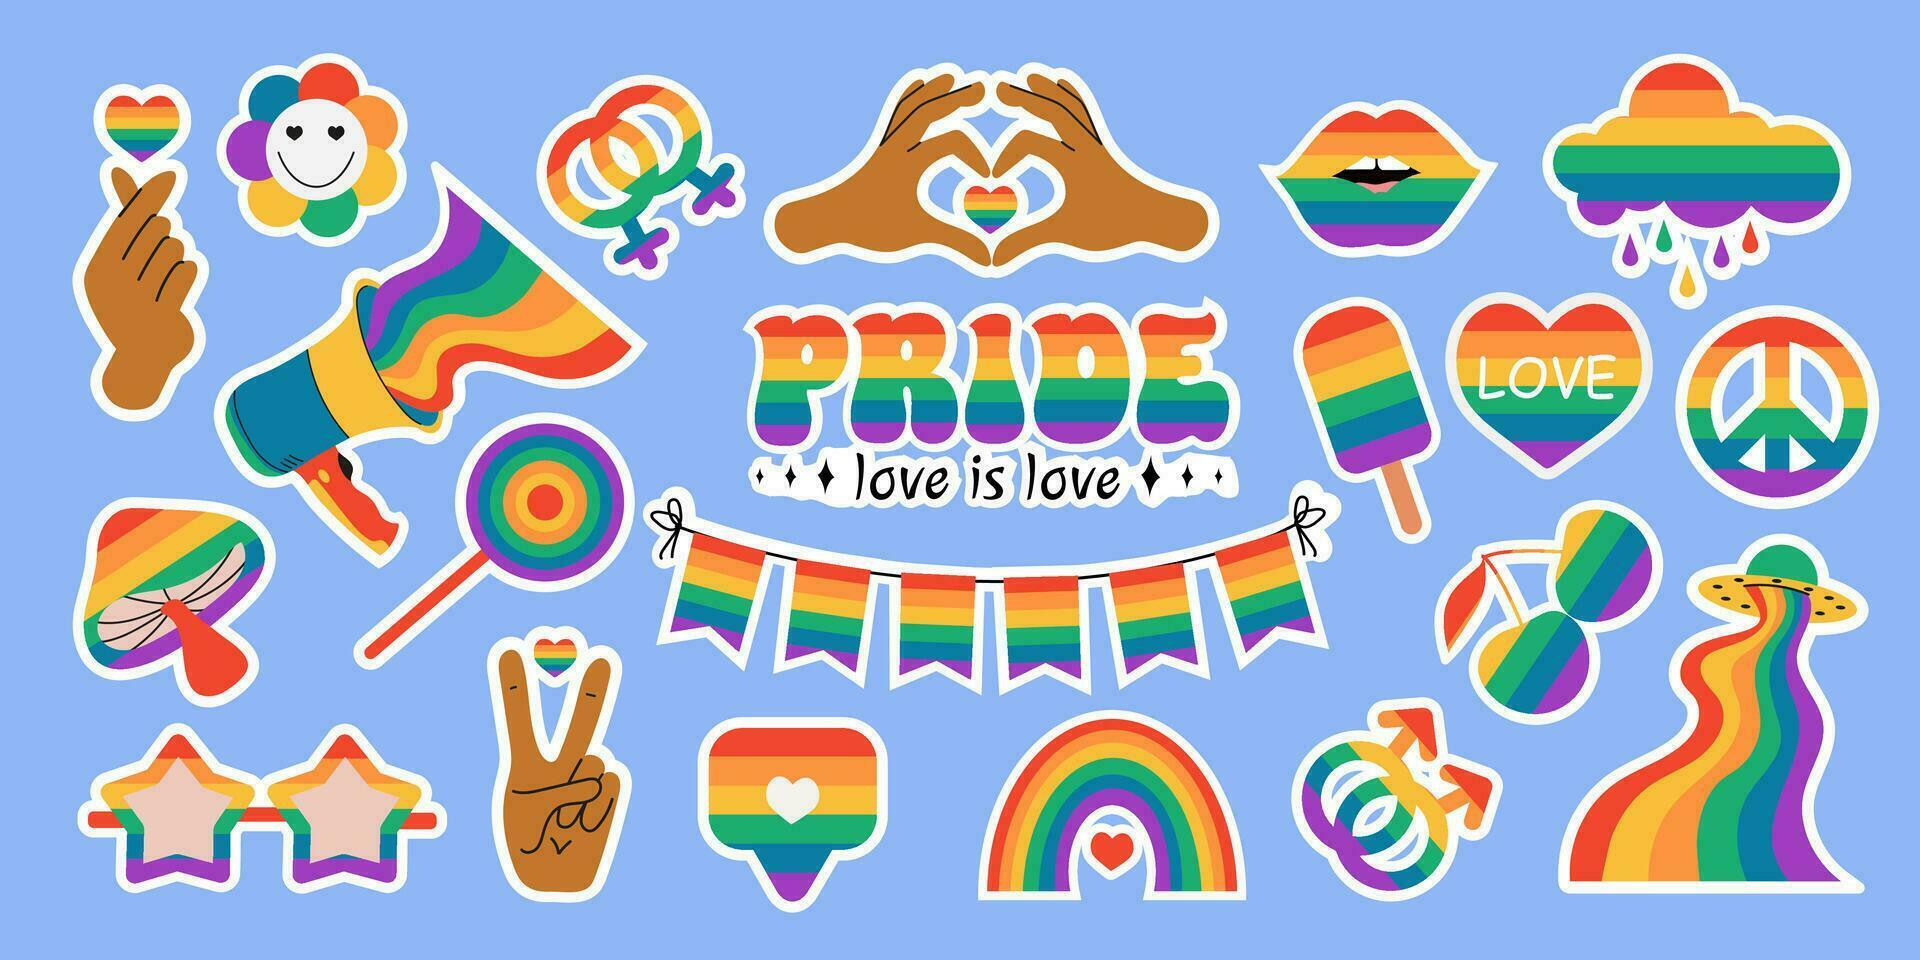 Large set of LGBT stickers on a blue background. Symbol of the LGBT pride community. LGBT flat style icons and slogan collection. Rainbow elements. vector